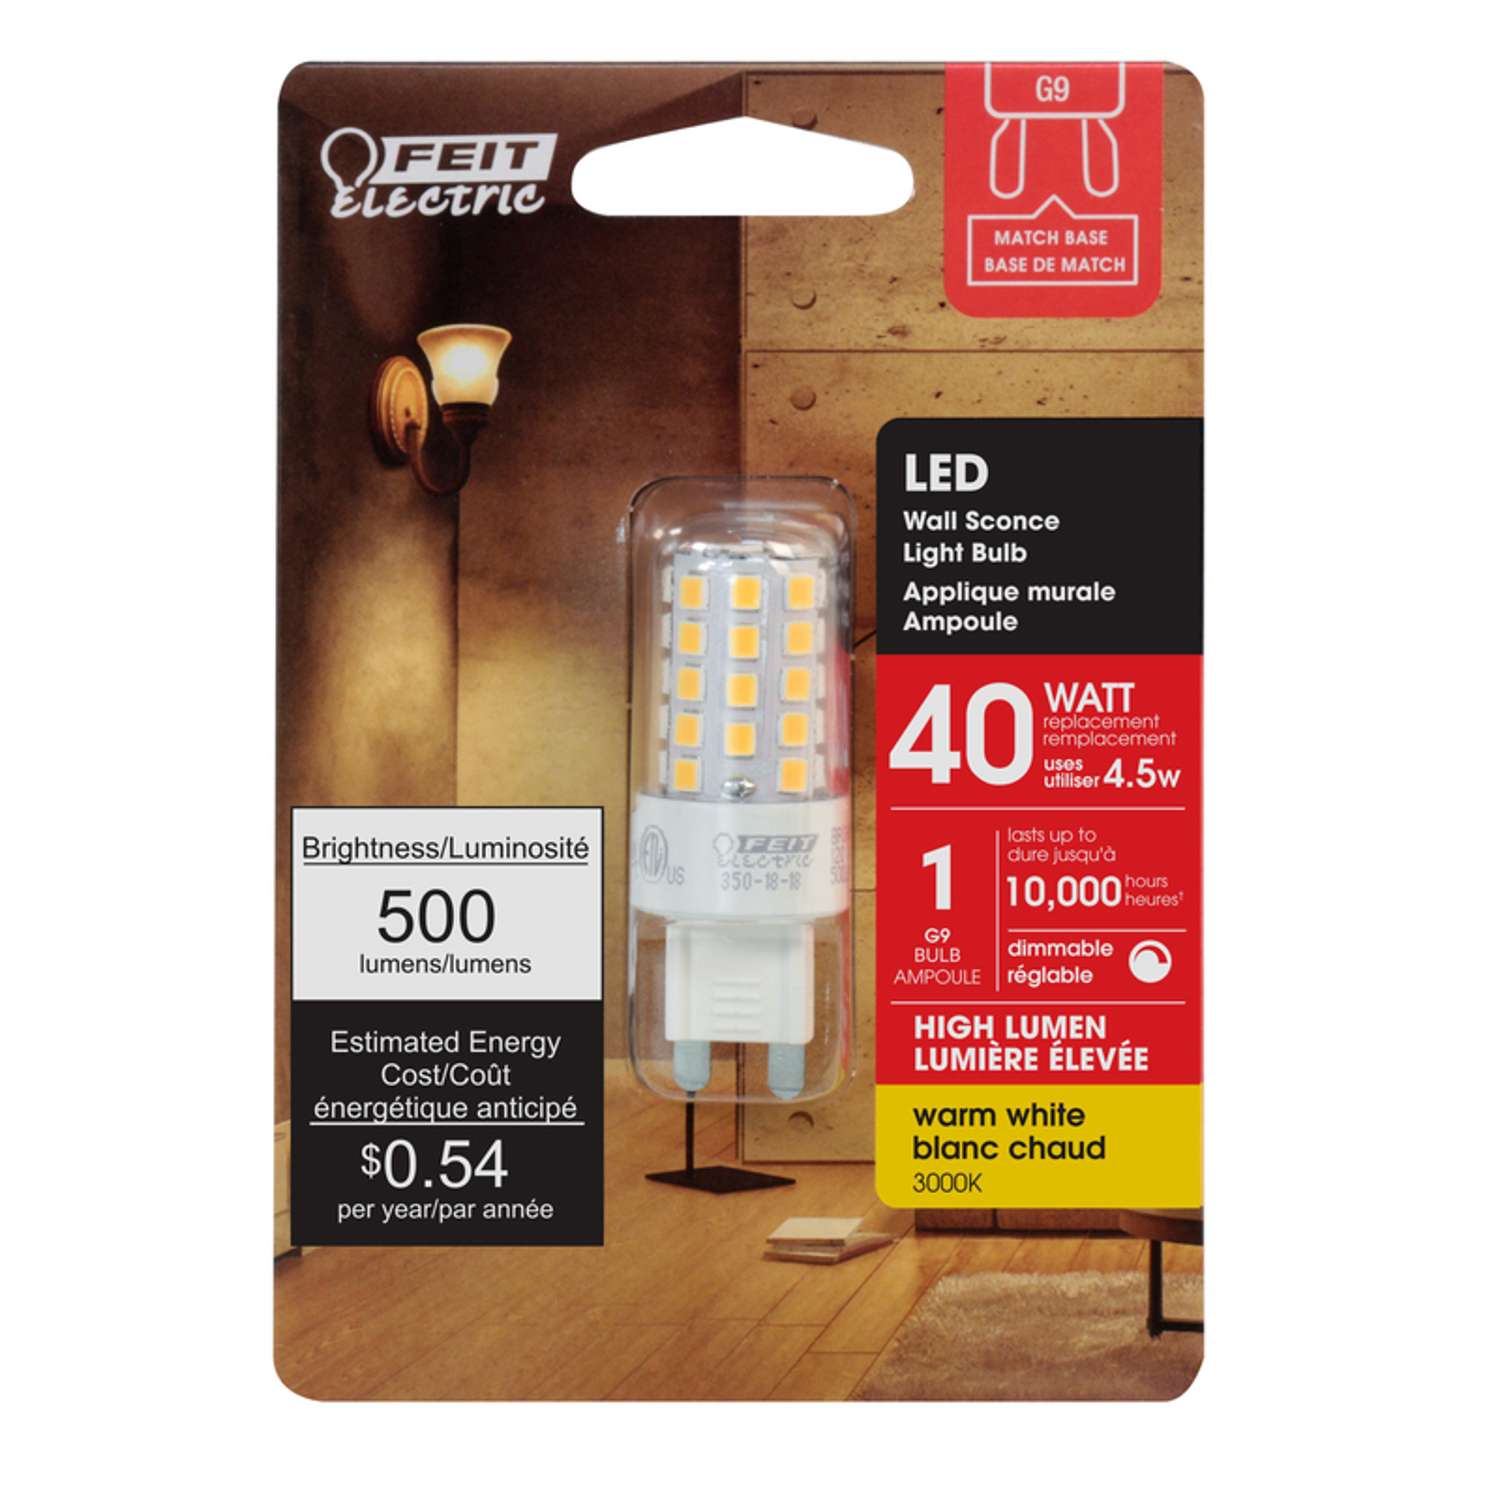 tieners Catastrofaal partitie Feit Electric G9 Bi-Pin LED Bulb Warm White 40 Watt Equivalence 1 pk - Ace  Hardware